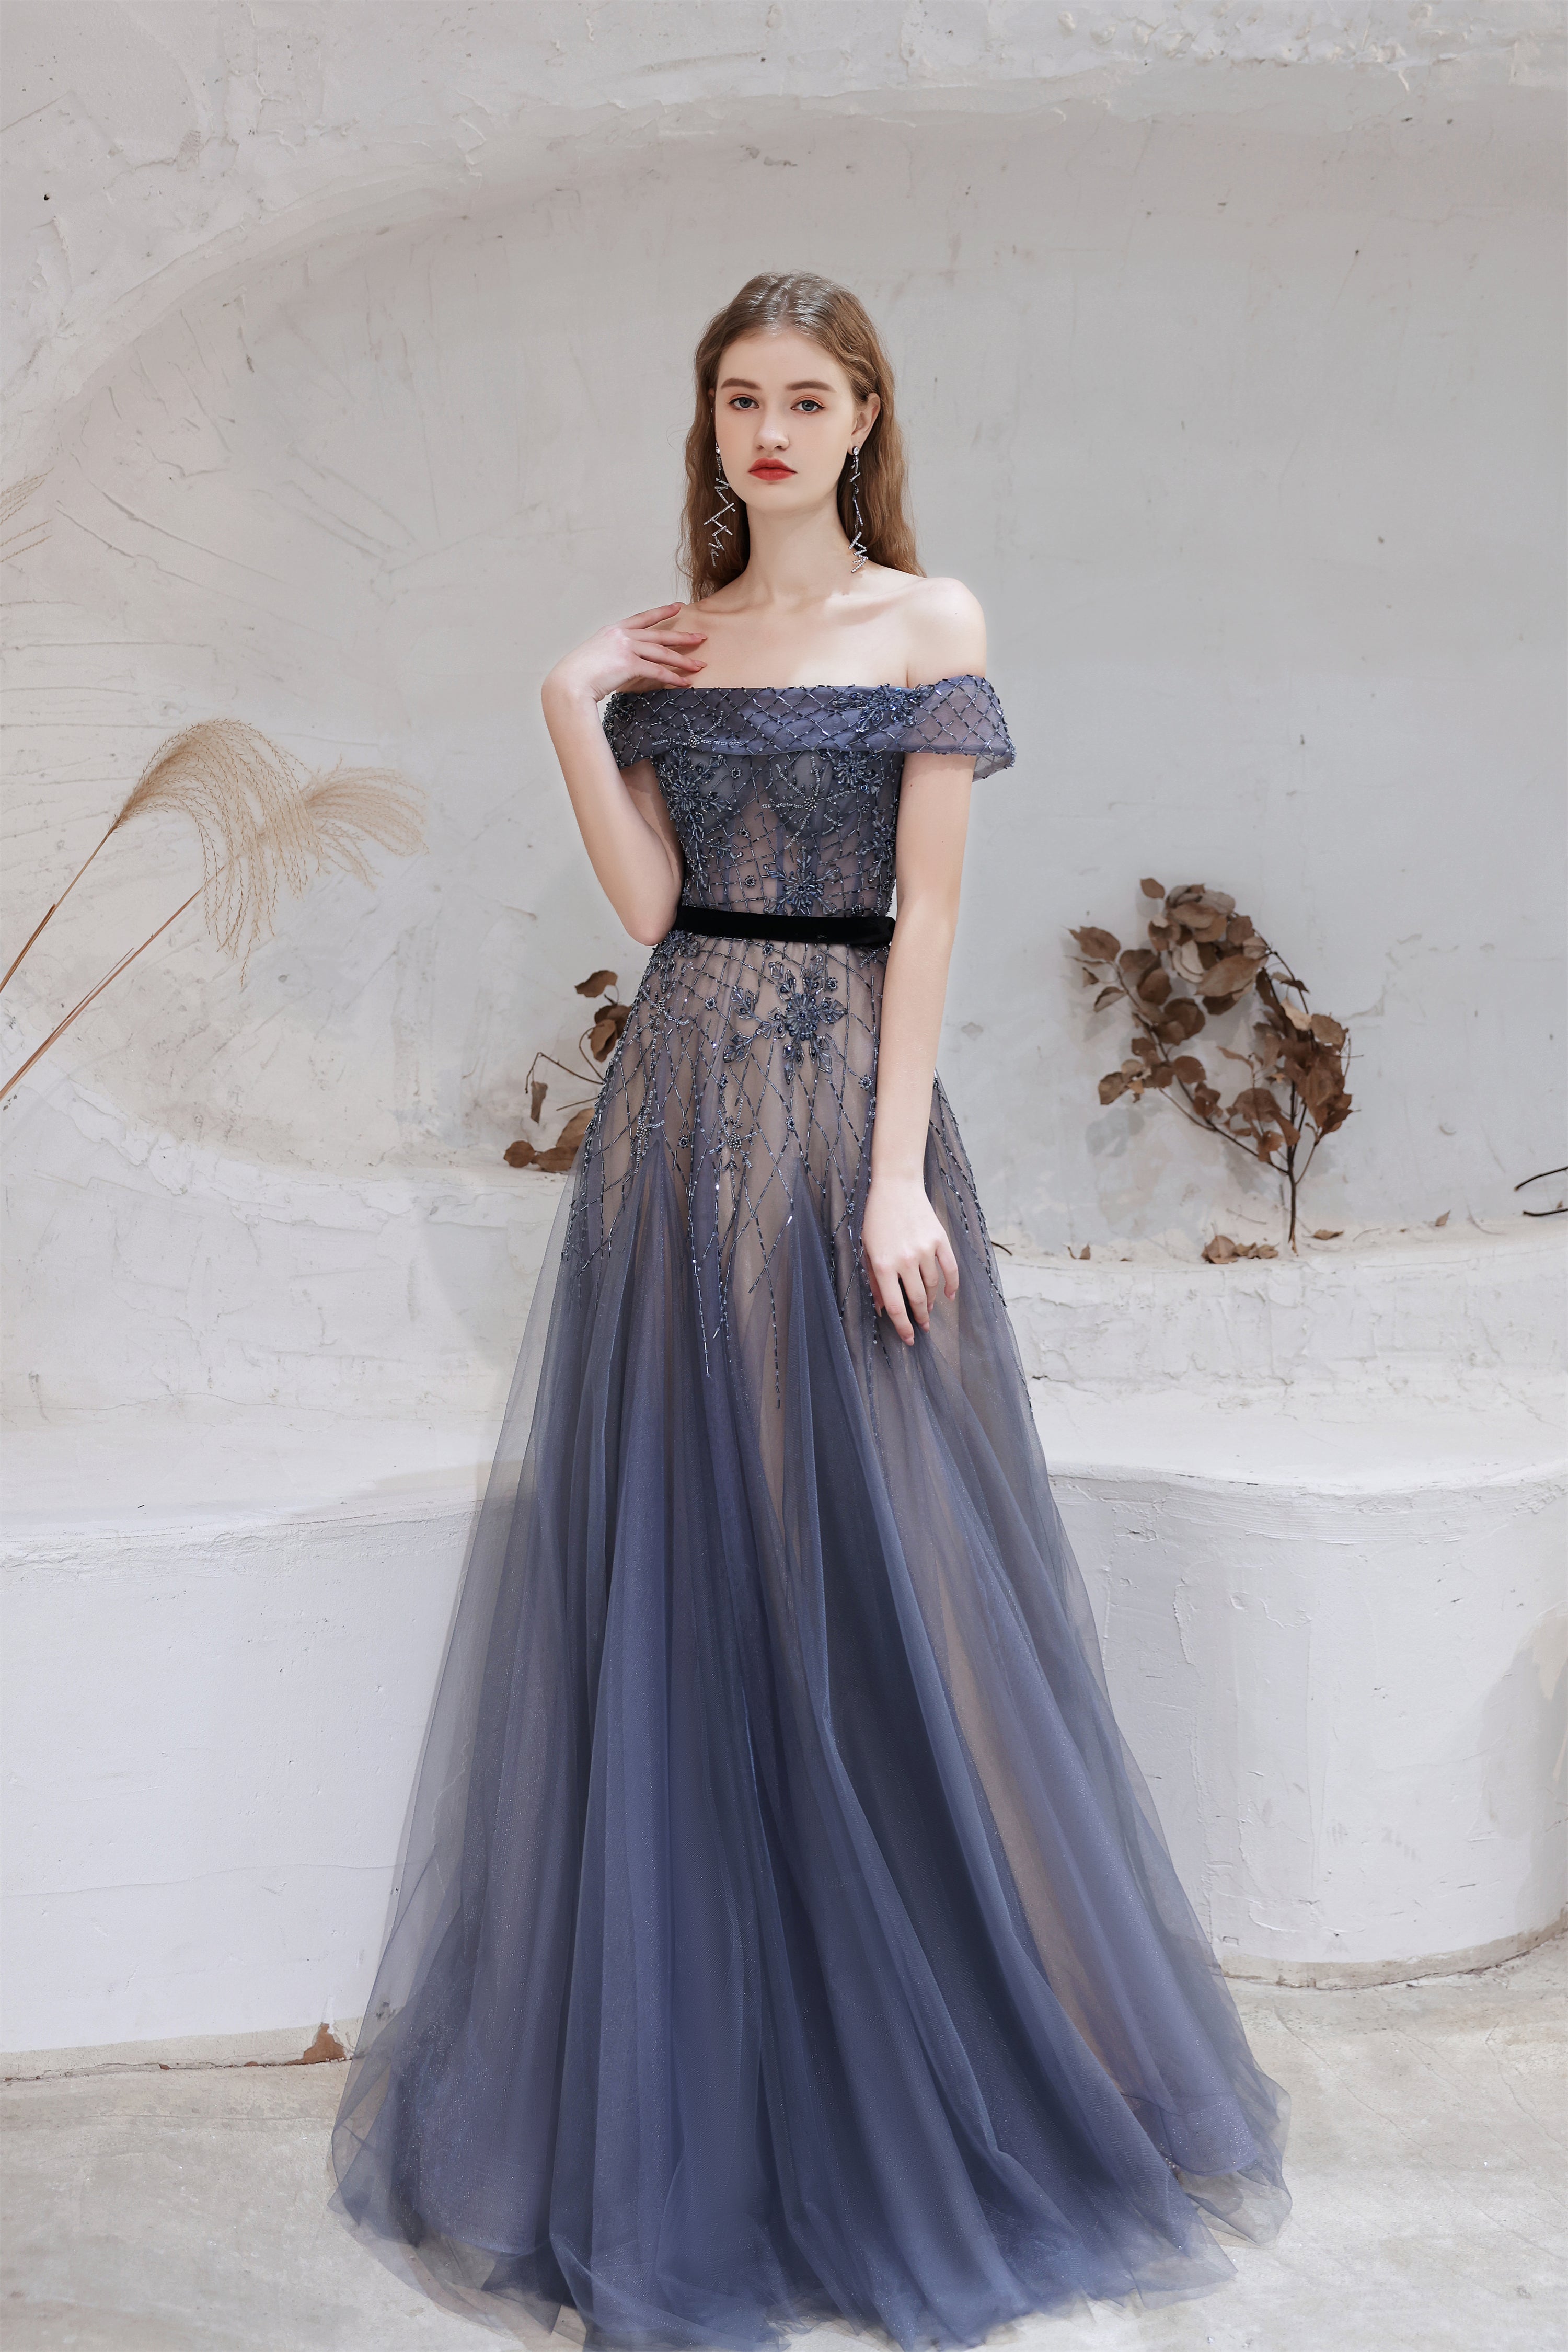 Evening Dress With Sleeves, A Line Bateau Neck Floor Length Short Sleeves Zipper Prom Dresses